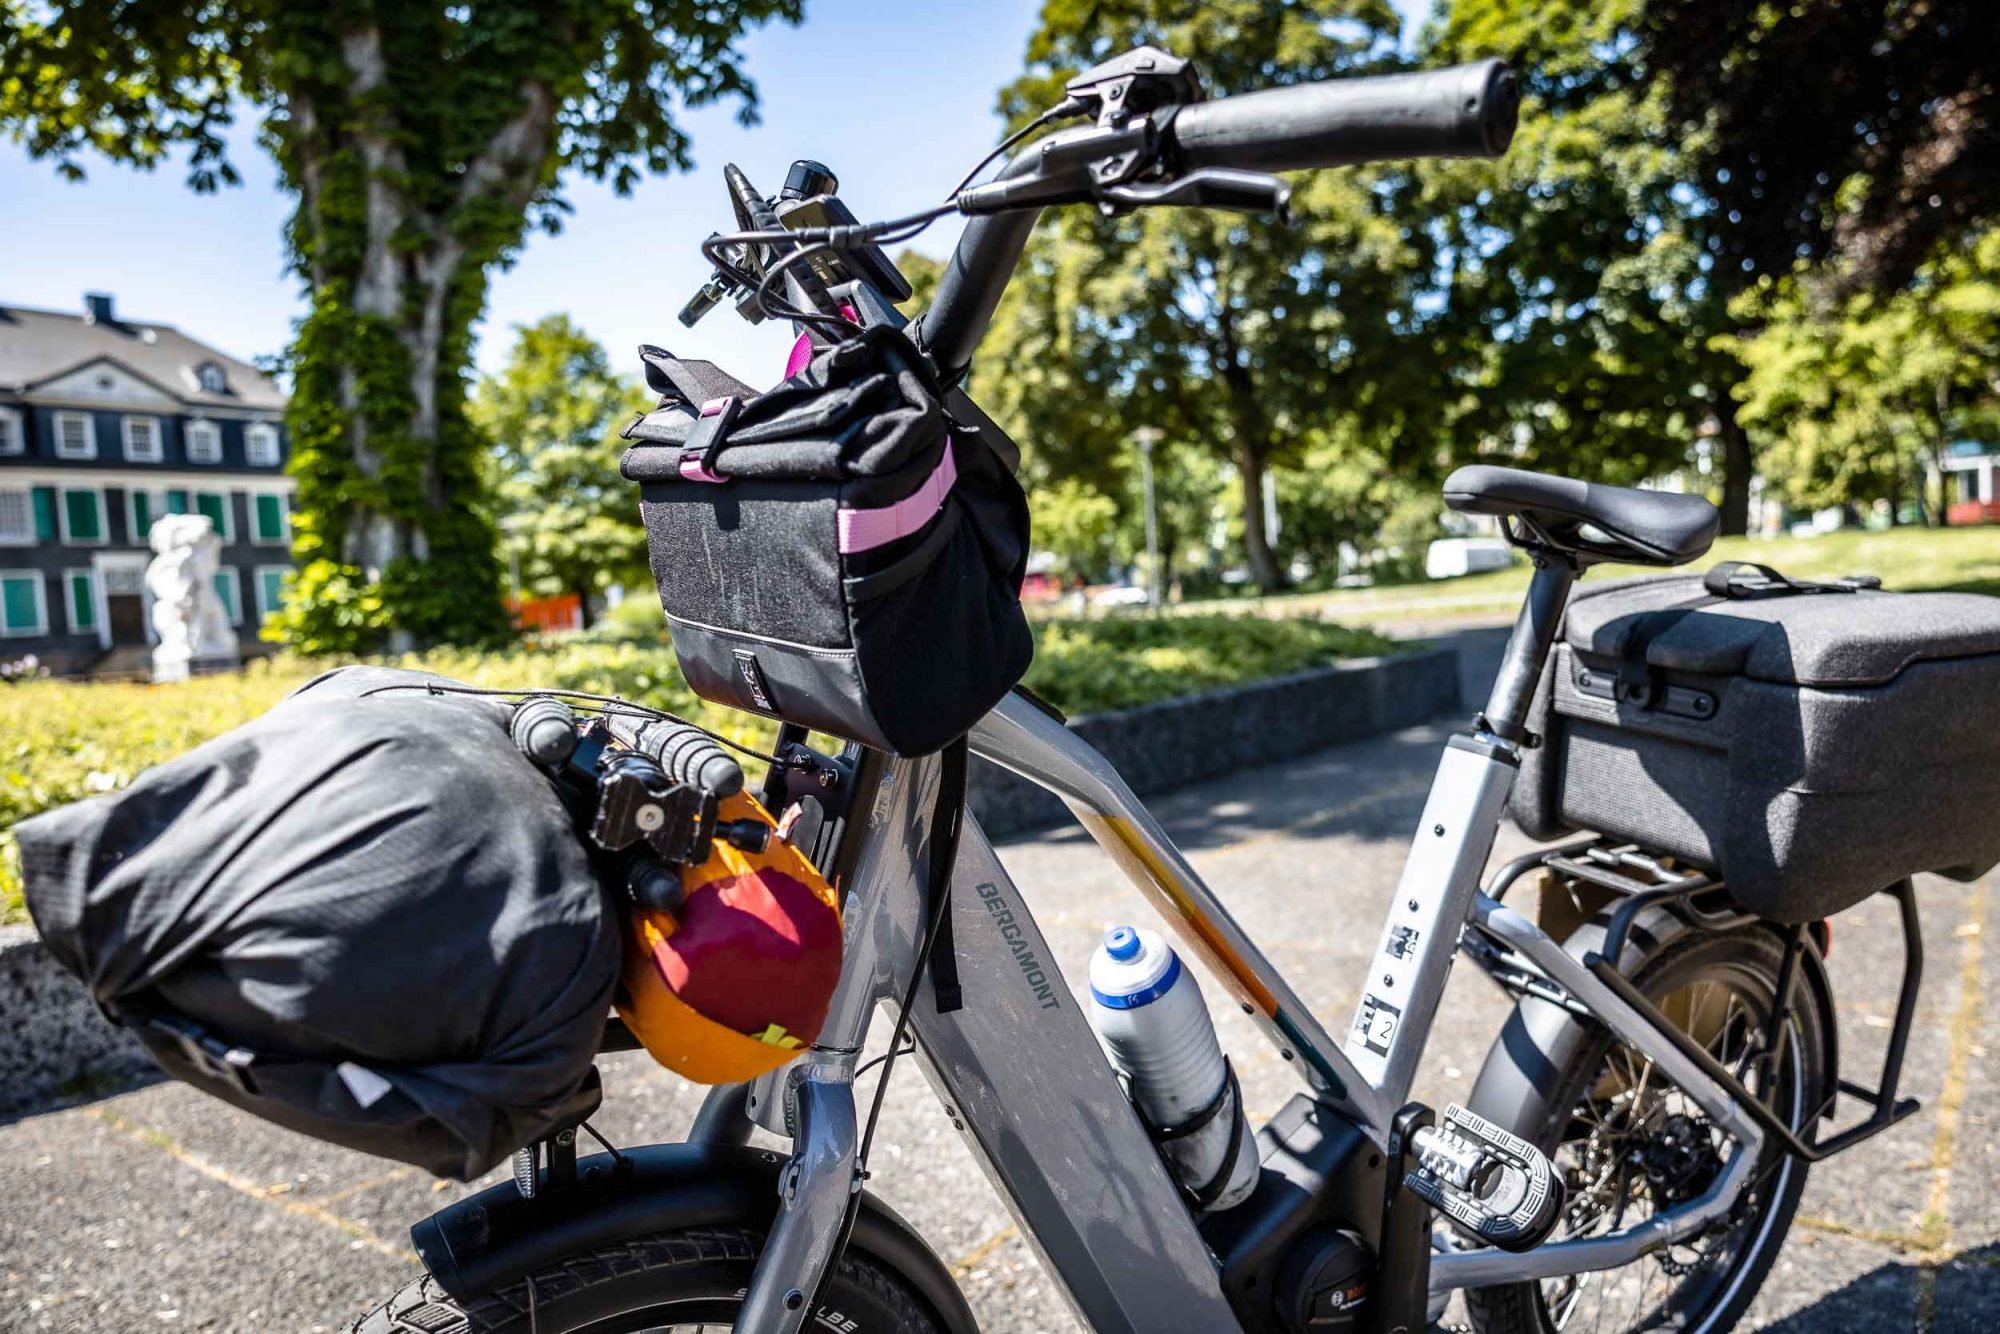 Bikepacking with bergamont's hans-e? At least you don't have to control yourself too much when packing.